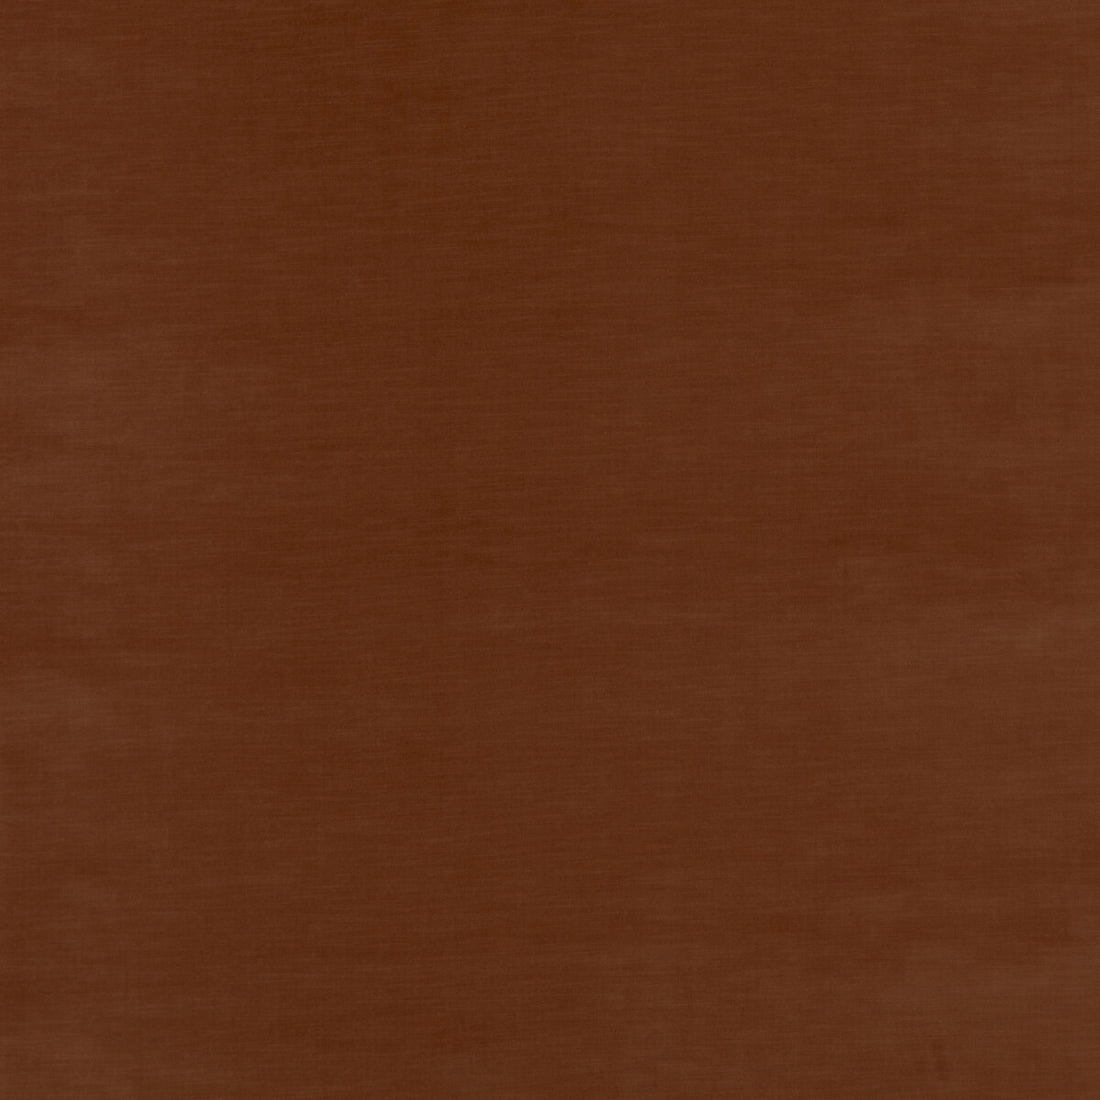 Quintessential Velvet fabric in copper color - pattern ED85359.355.0 - by Threads in the Quintessential Velvet collection